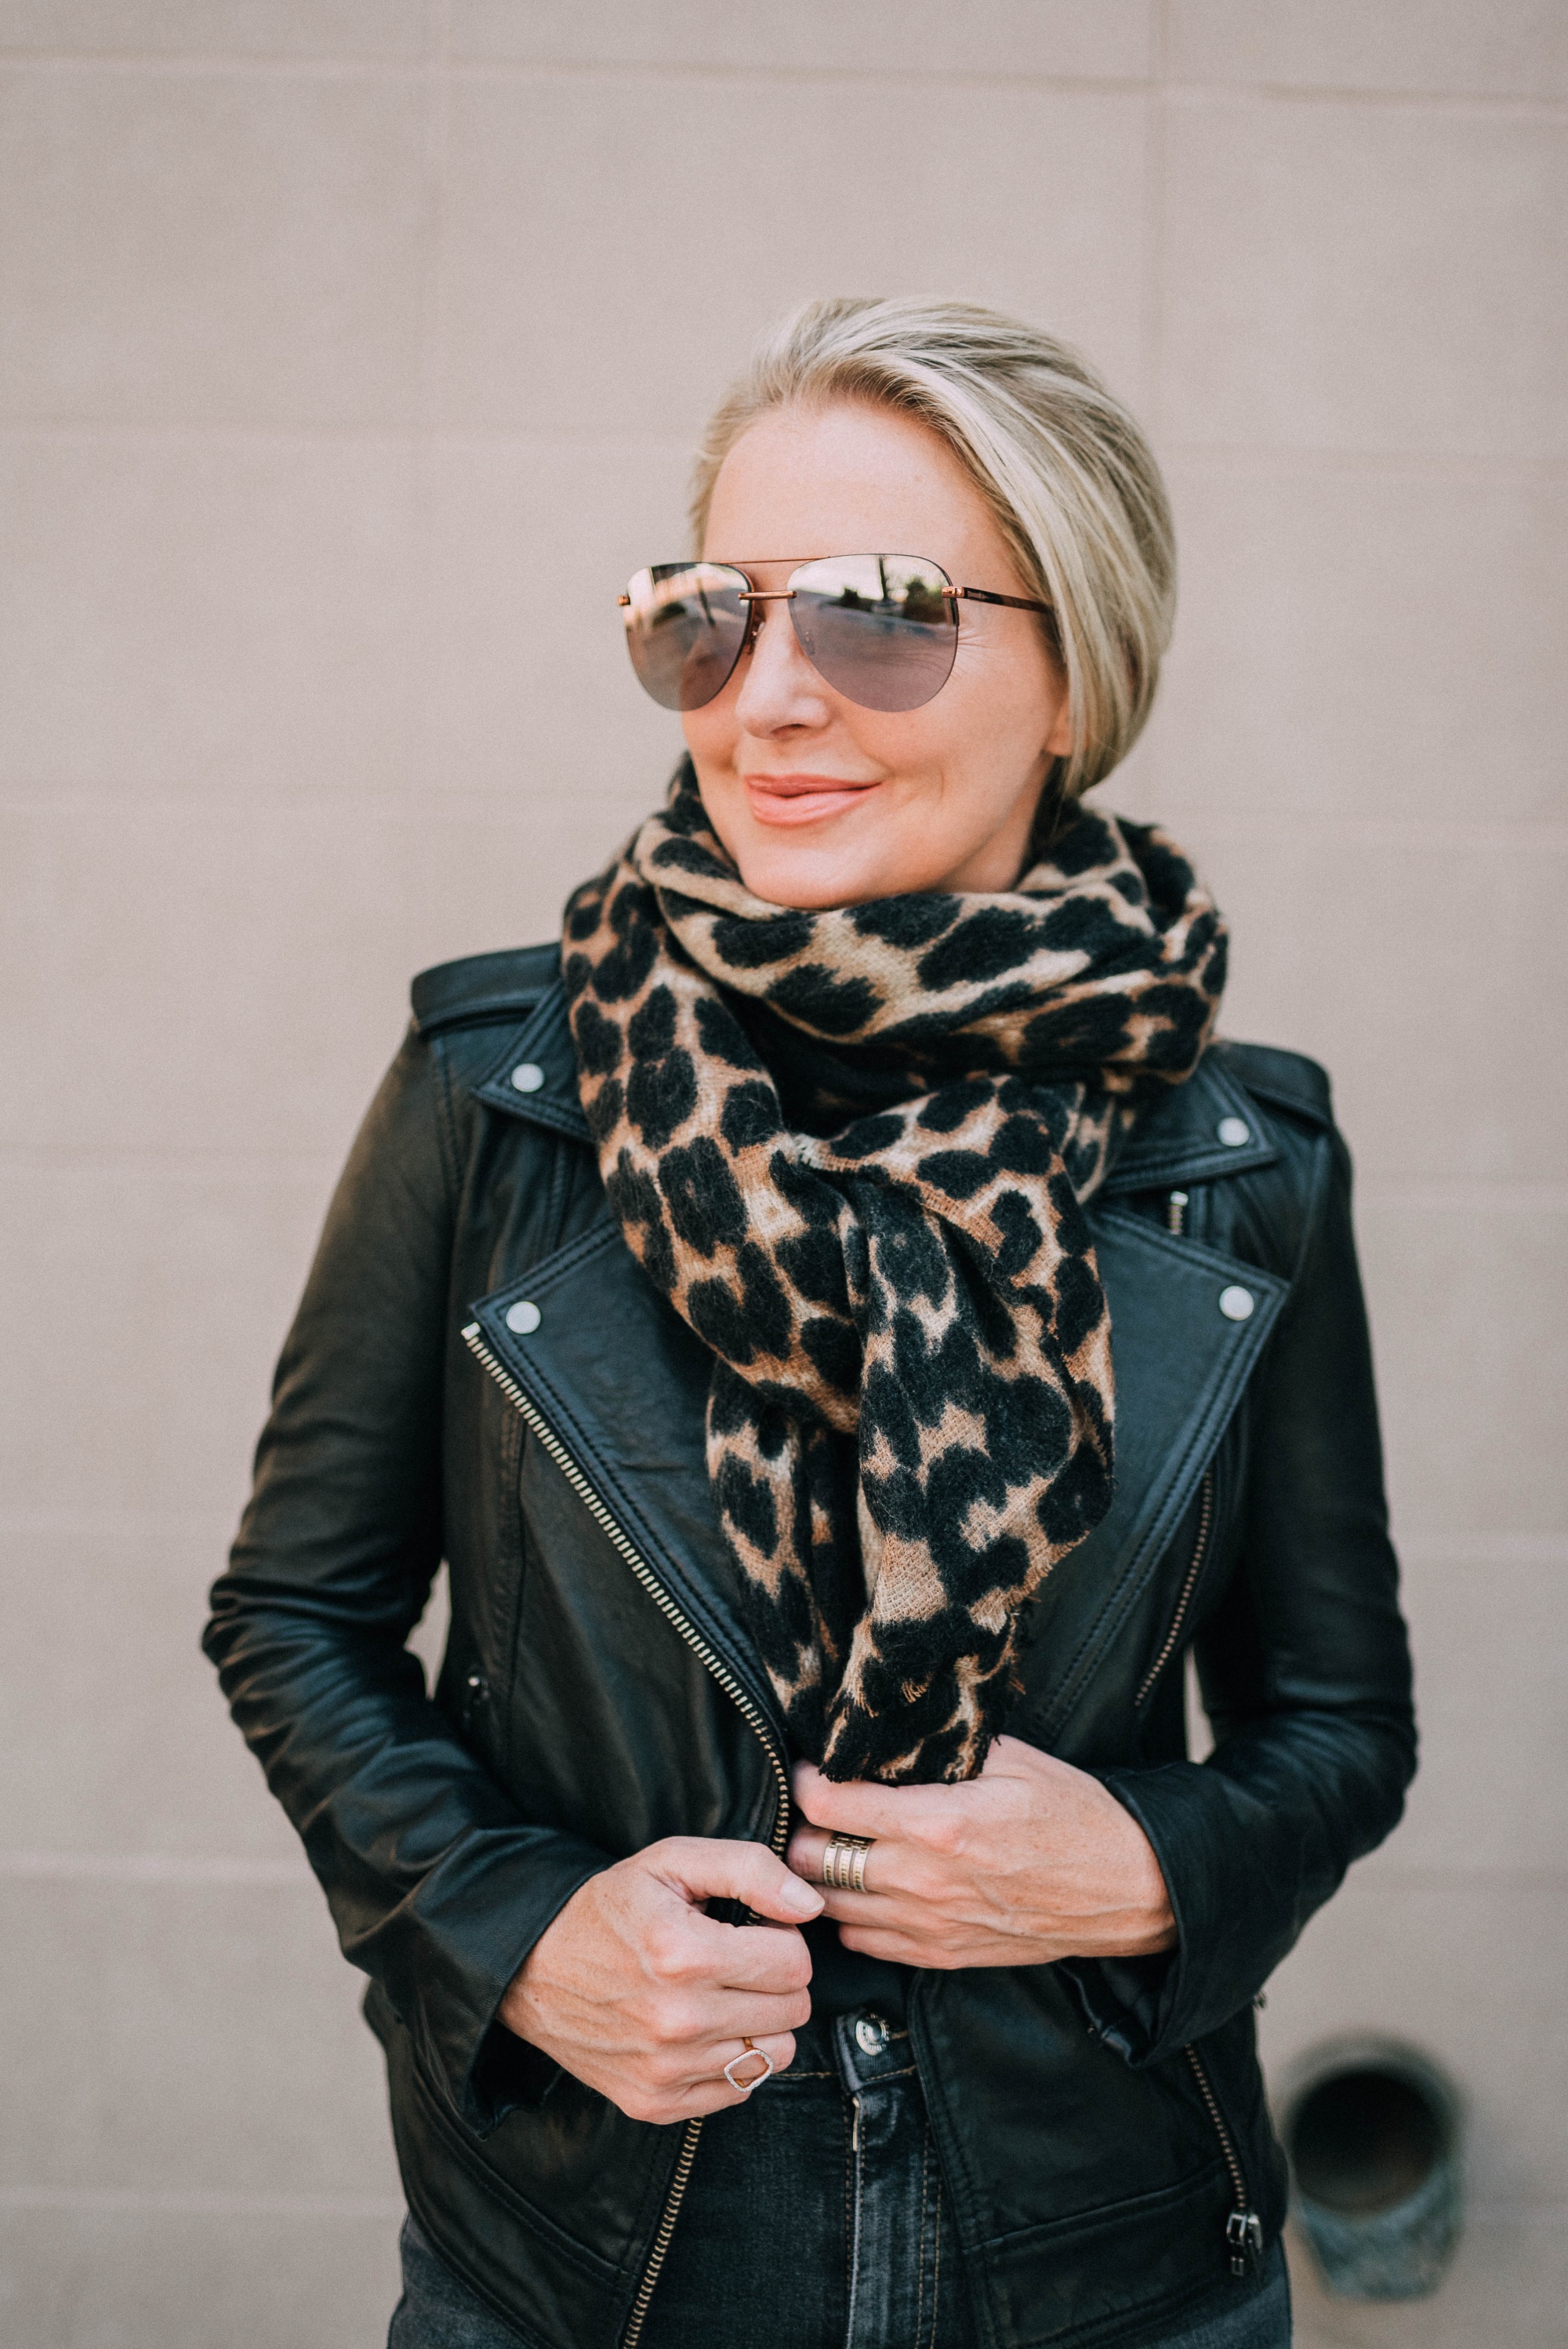 Leopard Print, Fashion blogger Erin Busbee of BusbeeStyle.com sharing the best leopard print pieces from the Nordstrom Anniversary Sale 2019 including a leopard print scarf